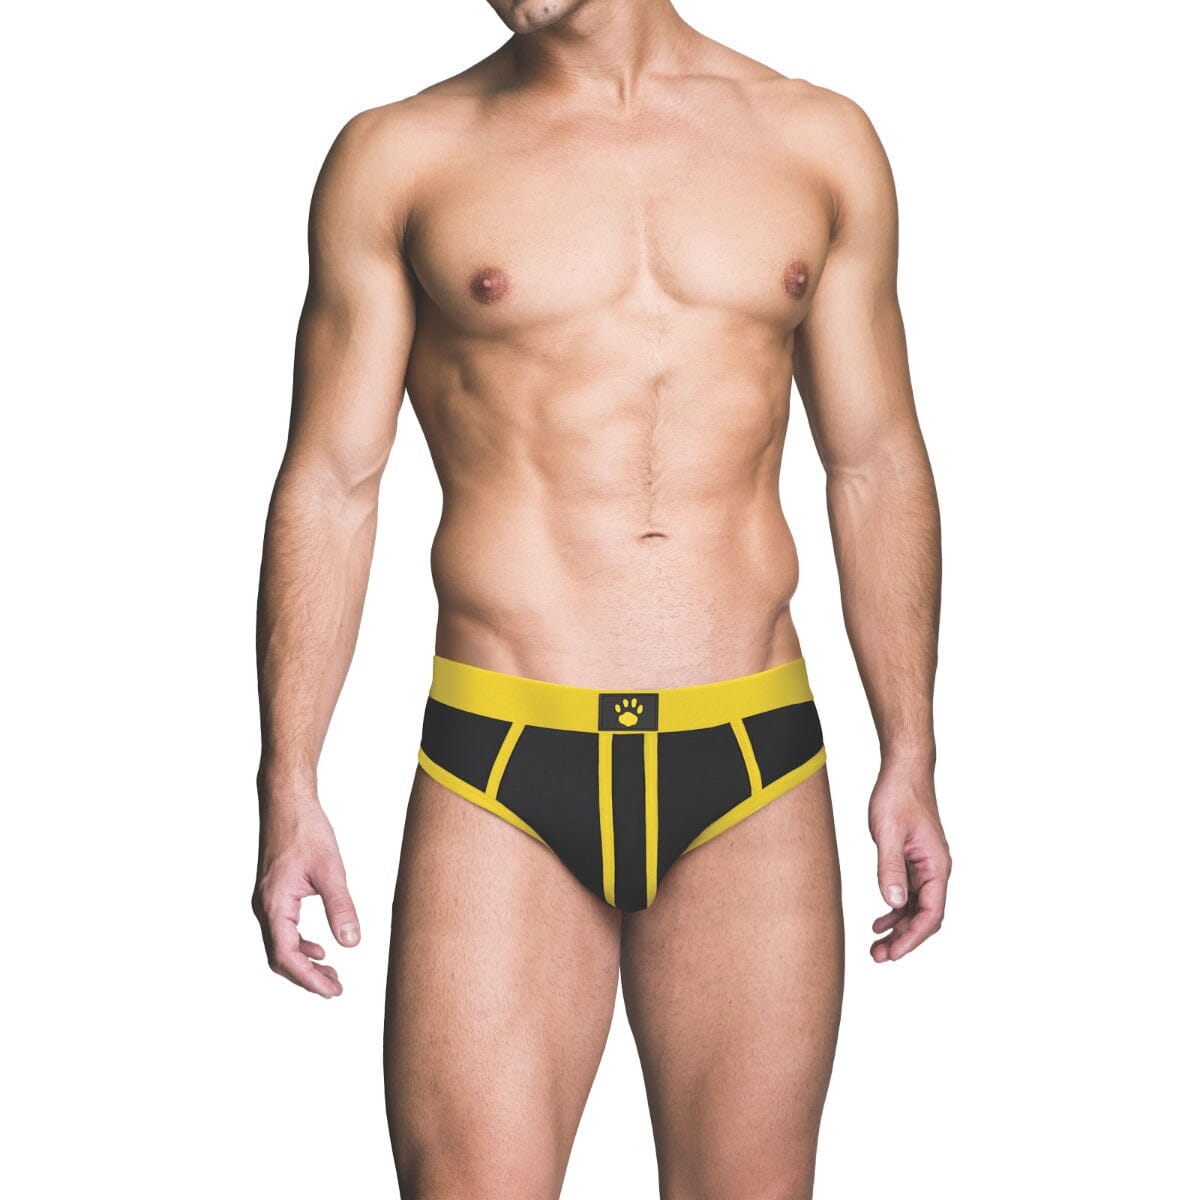 Prowler RED Ass-less Brief Yellow Menswear Prowler RED (ABS PRO) 